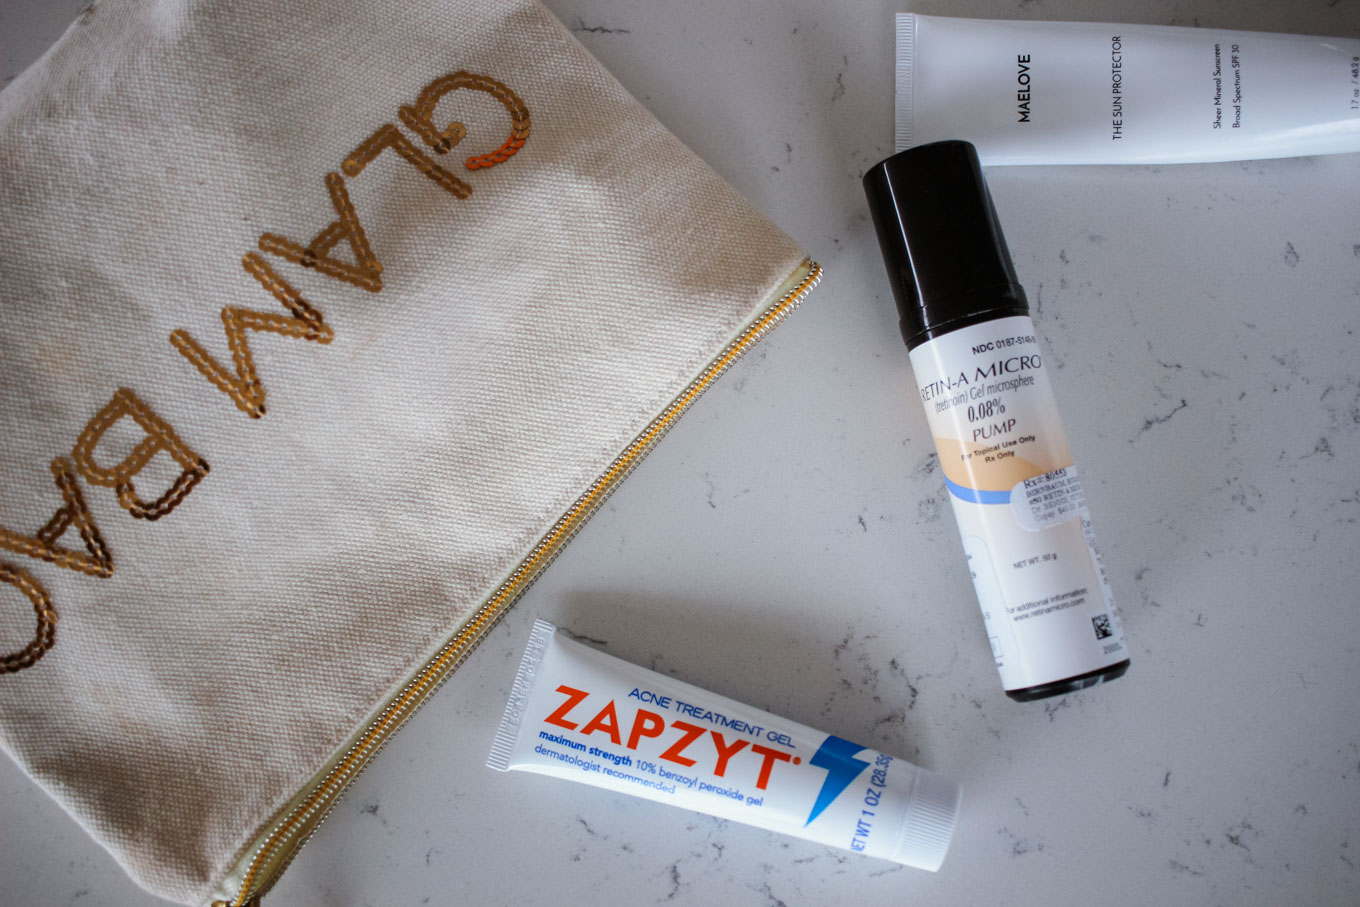 Lifestyle blogger Roxanne of Glass of Glam's acne skincare routine with zapzyt